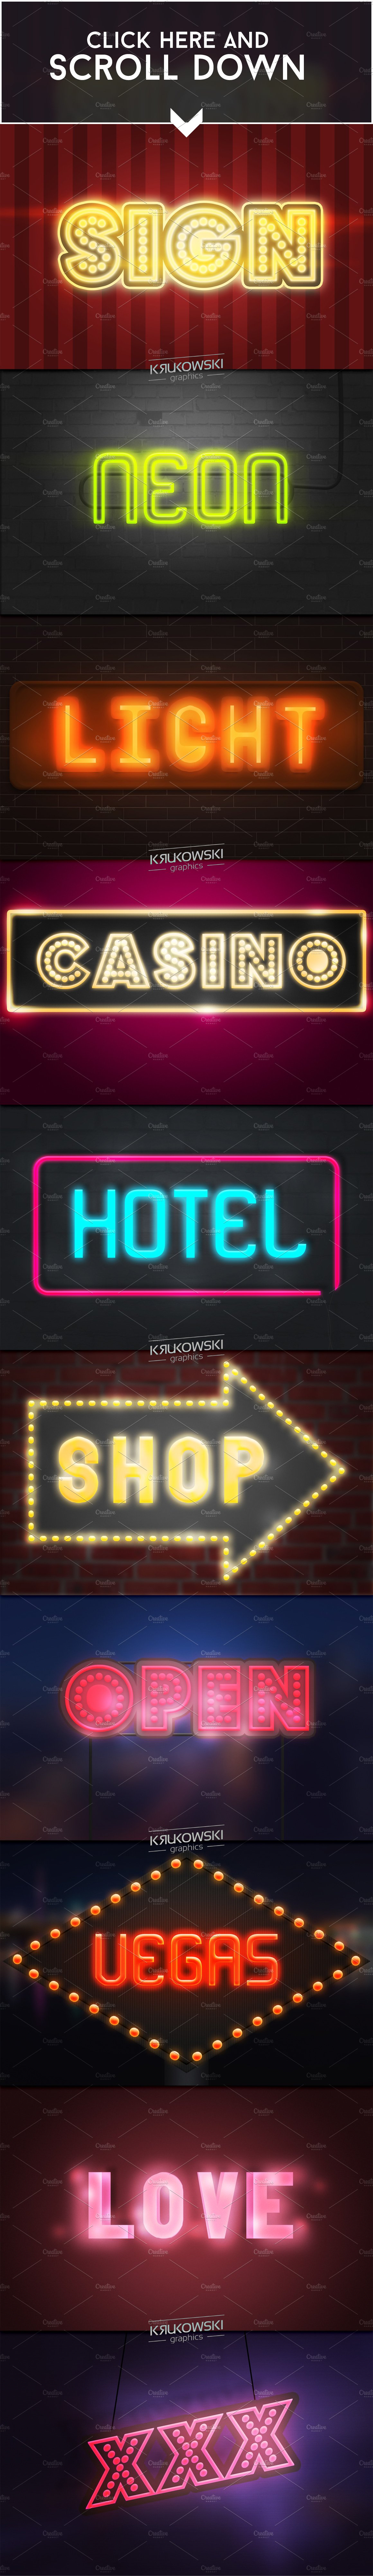 Light Signs Text Effectpreview image.